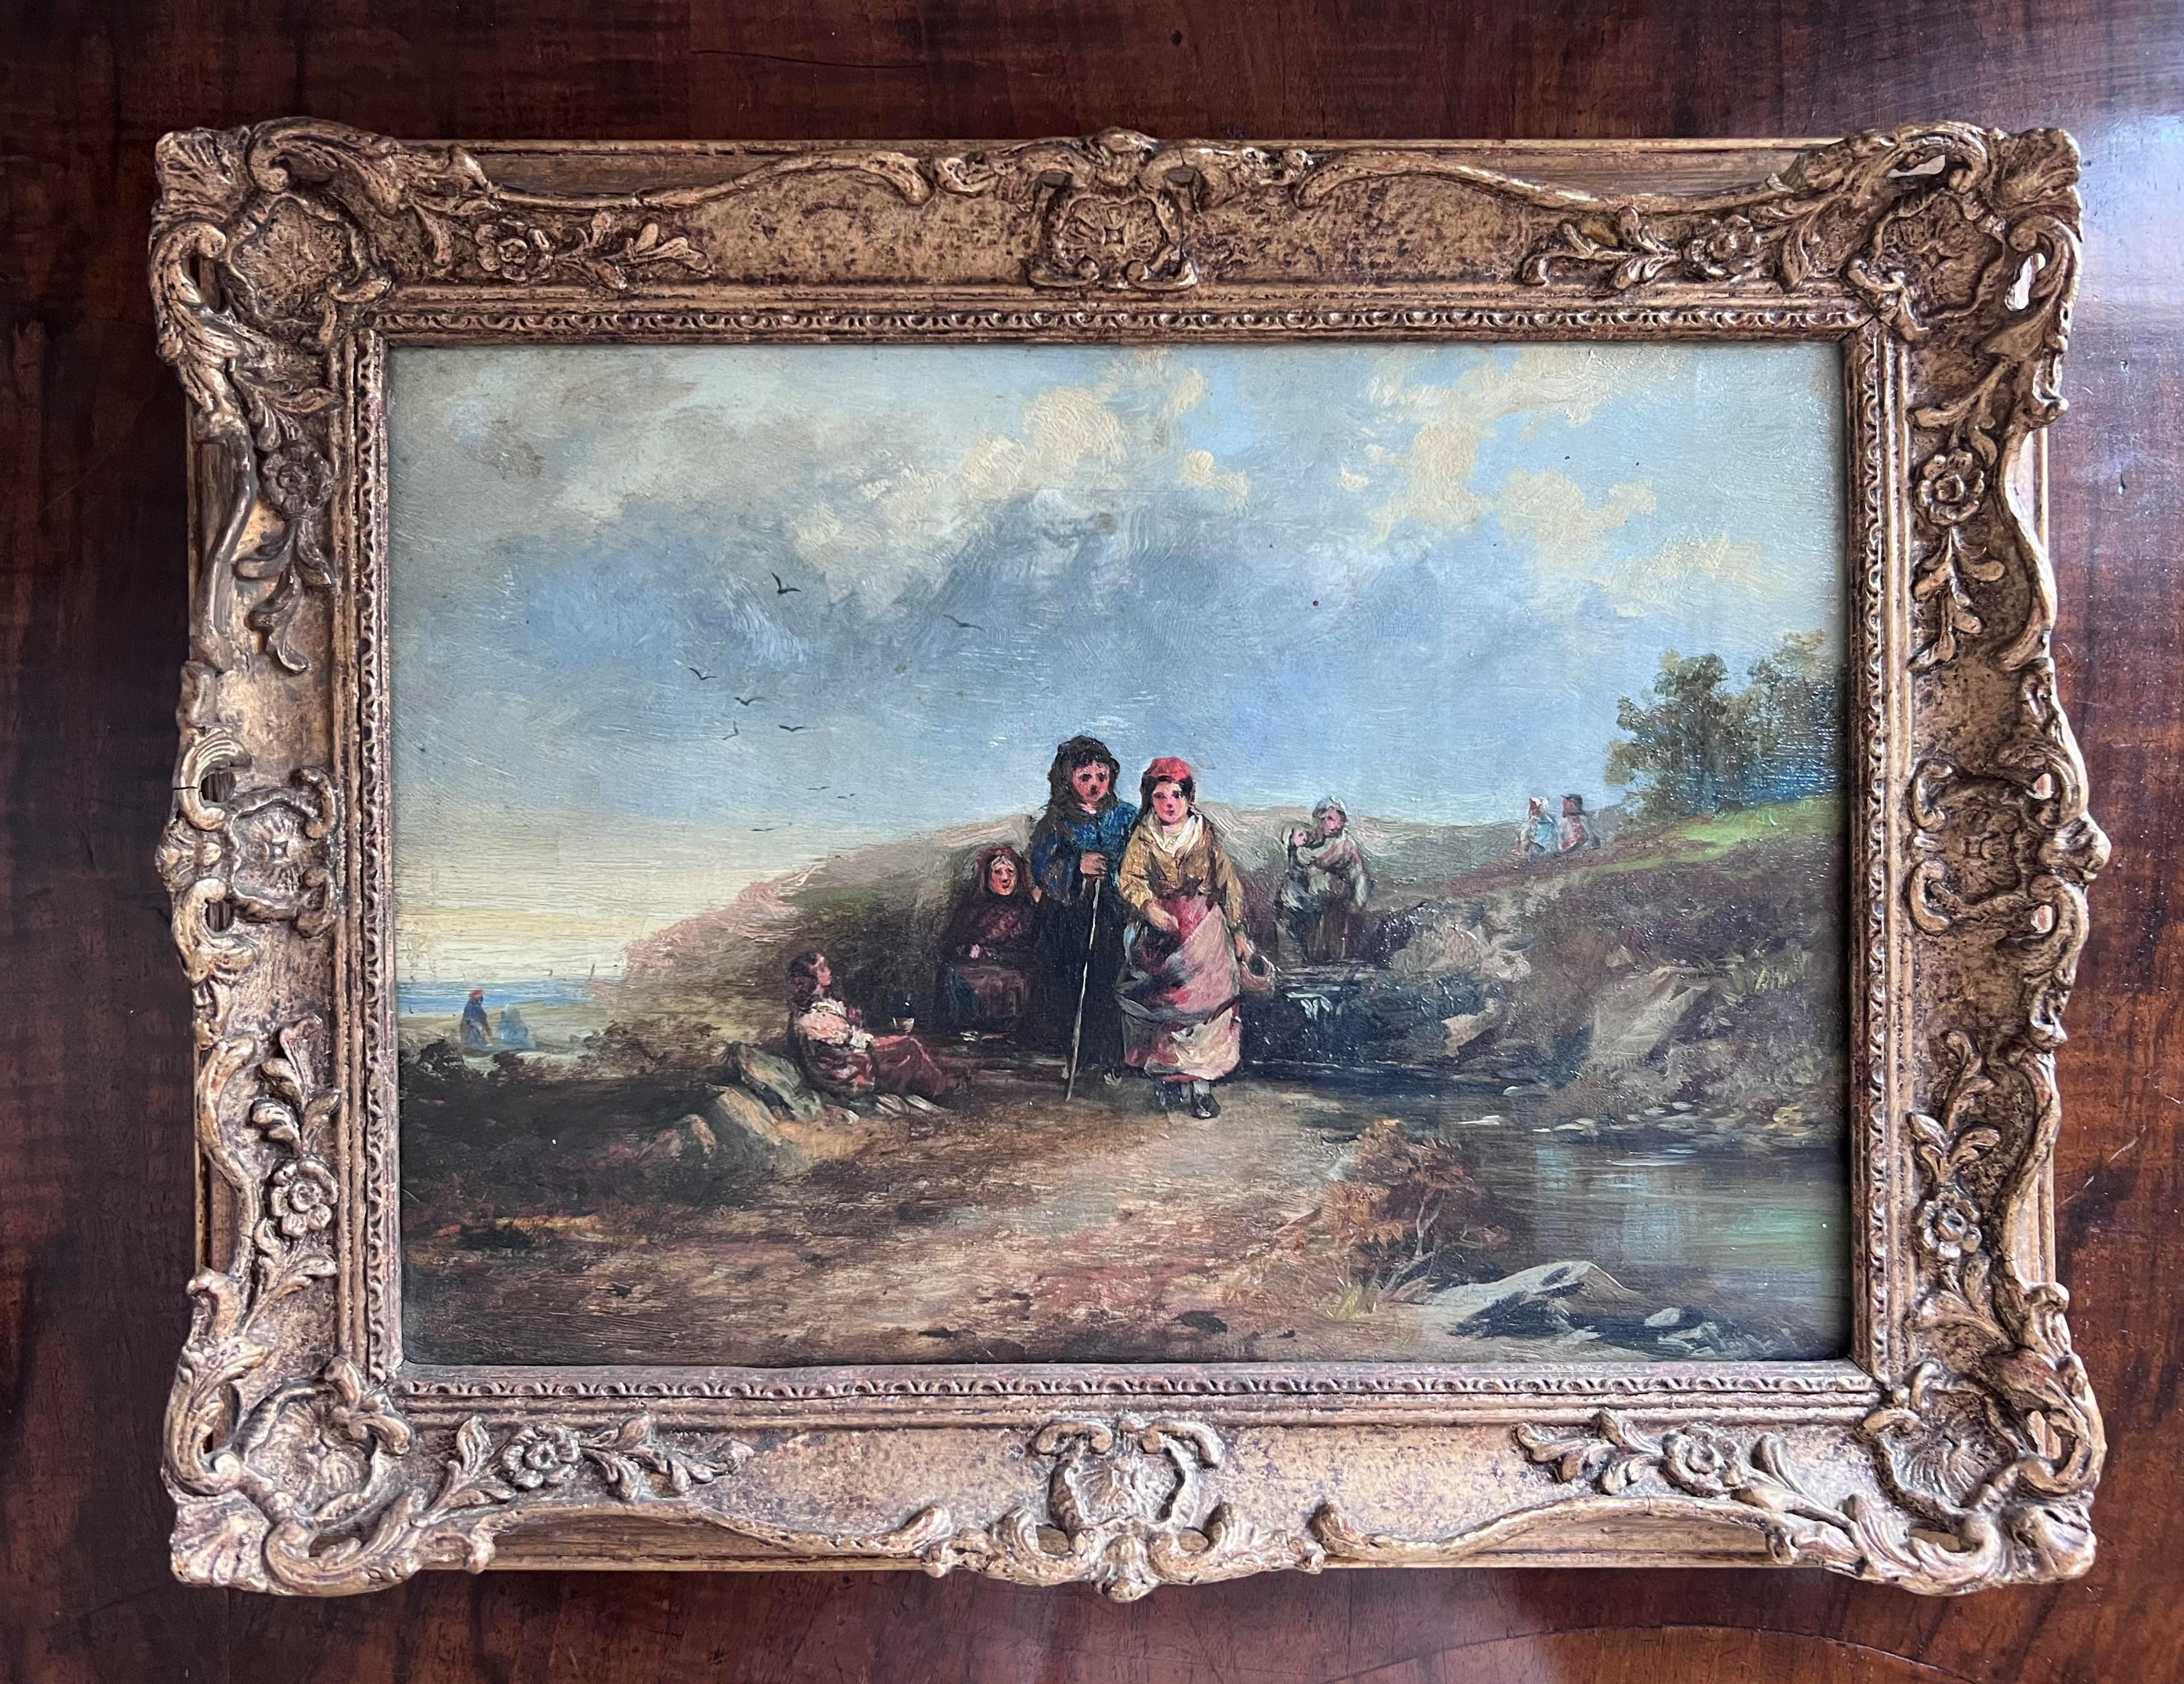 Unknown Figurative Painting - 19th Century Painting of Women Crossing Stream 